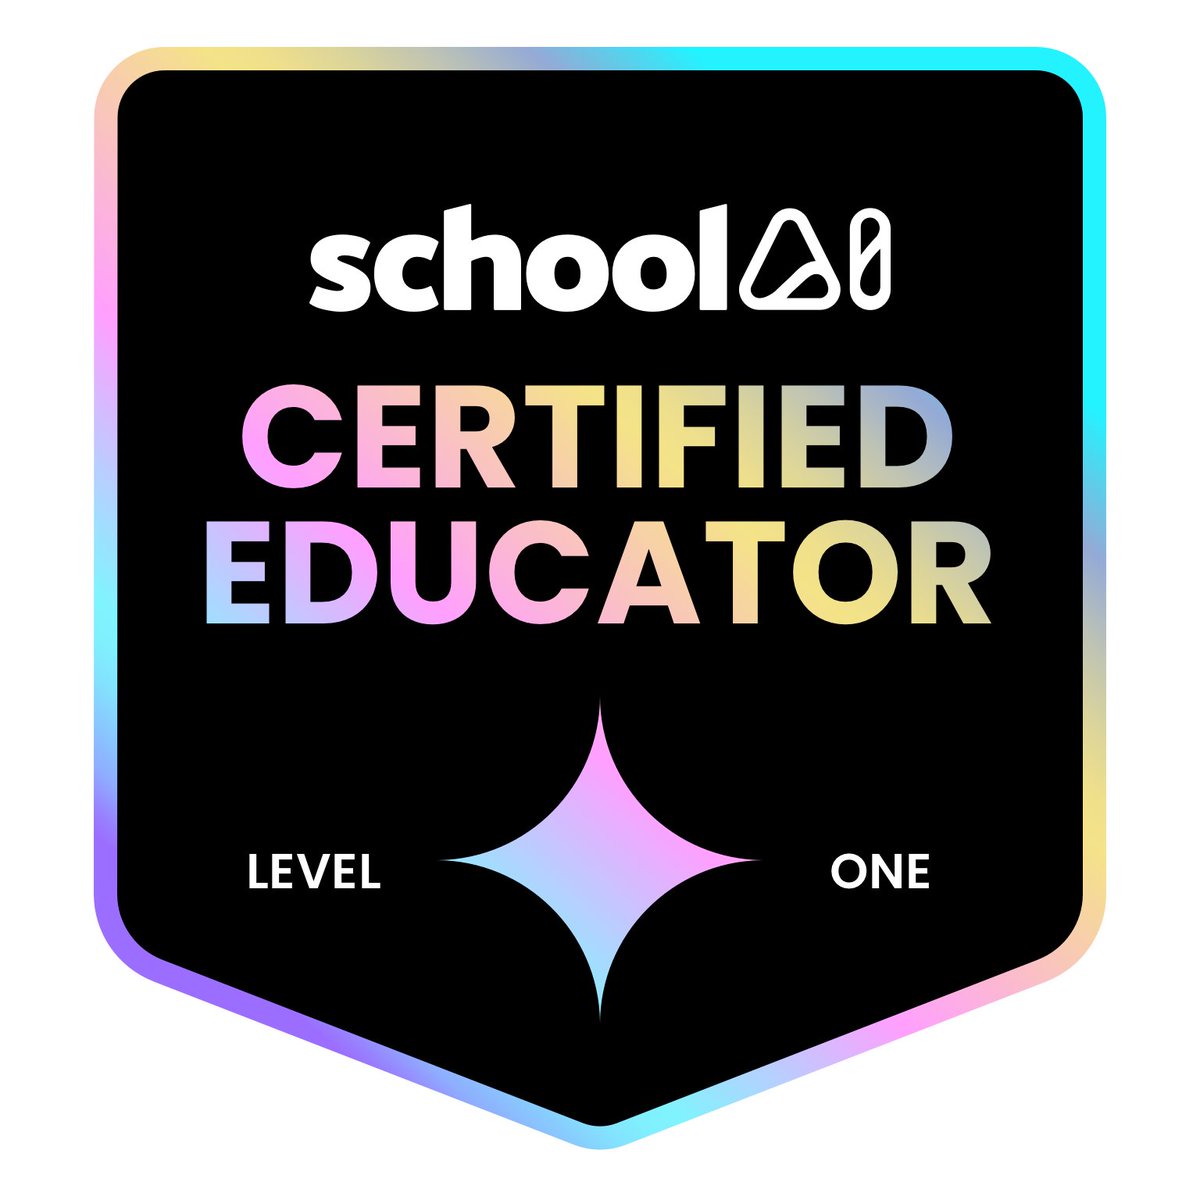 Finished my Certified Educator training for @GetSchoolAI today! Can't wait to share about this awesome AI tool at trainings this summer.